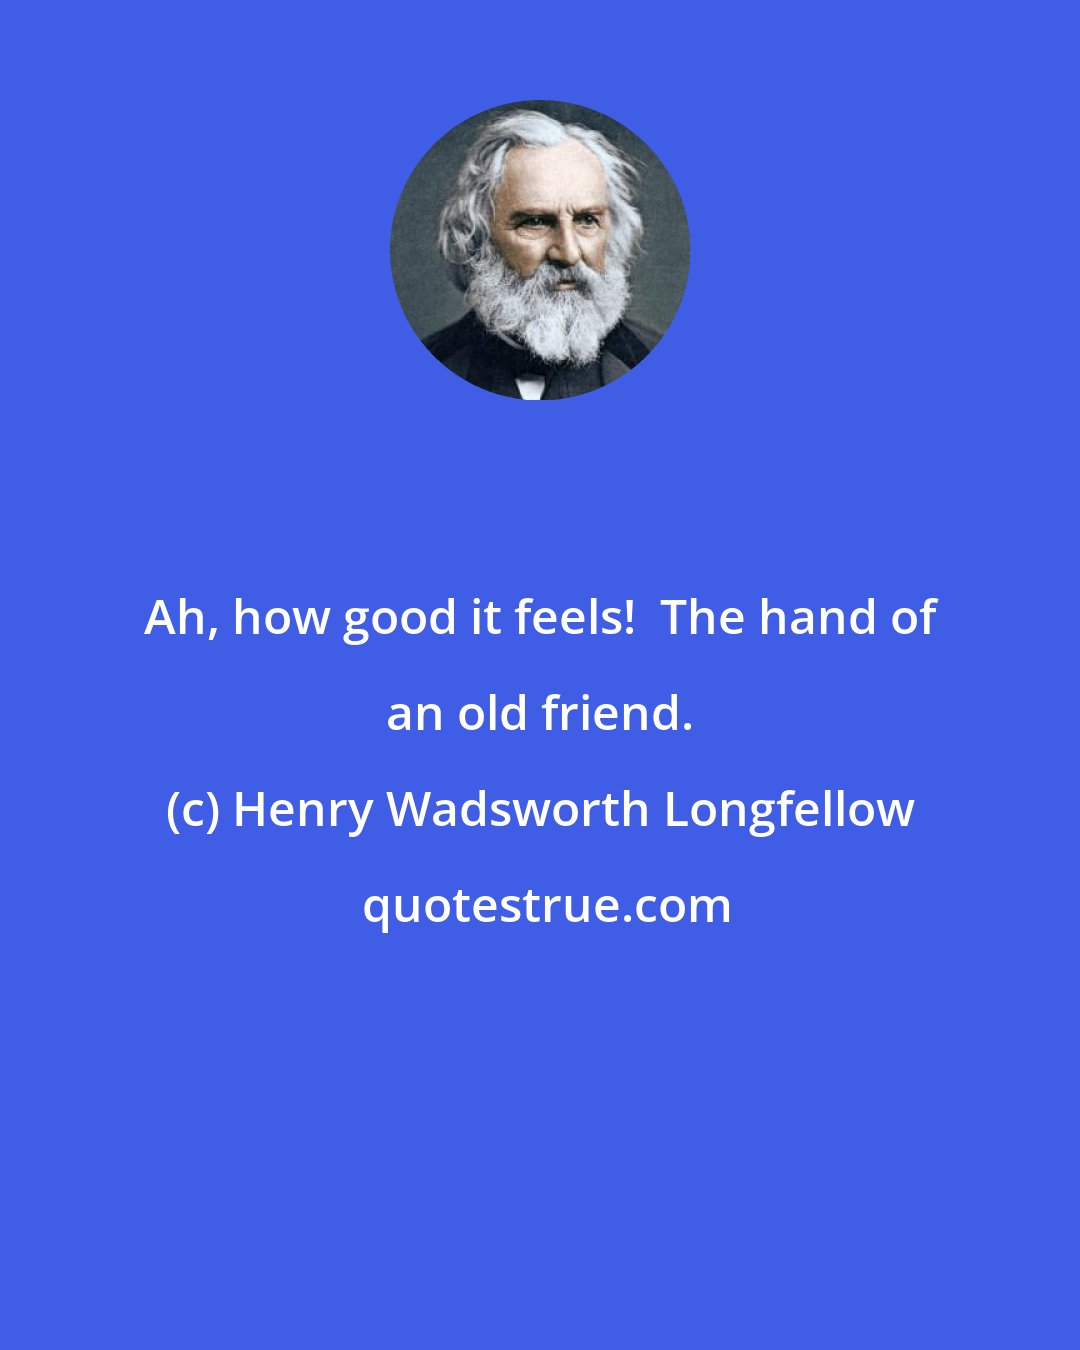 Henry Wadsworth Longfellow: Ah, how good it feels!  The hand of an old friend.